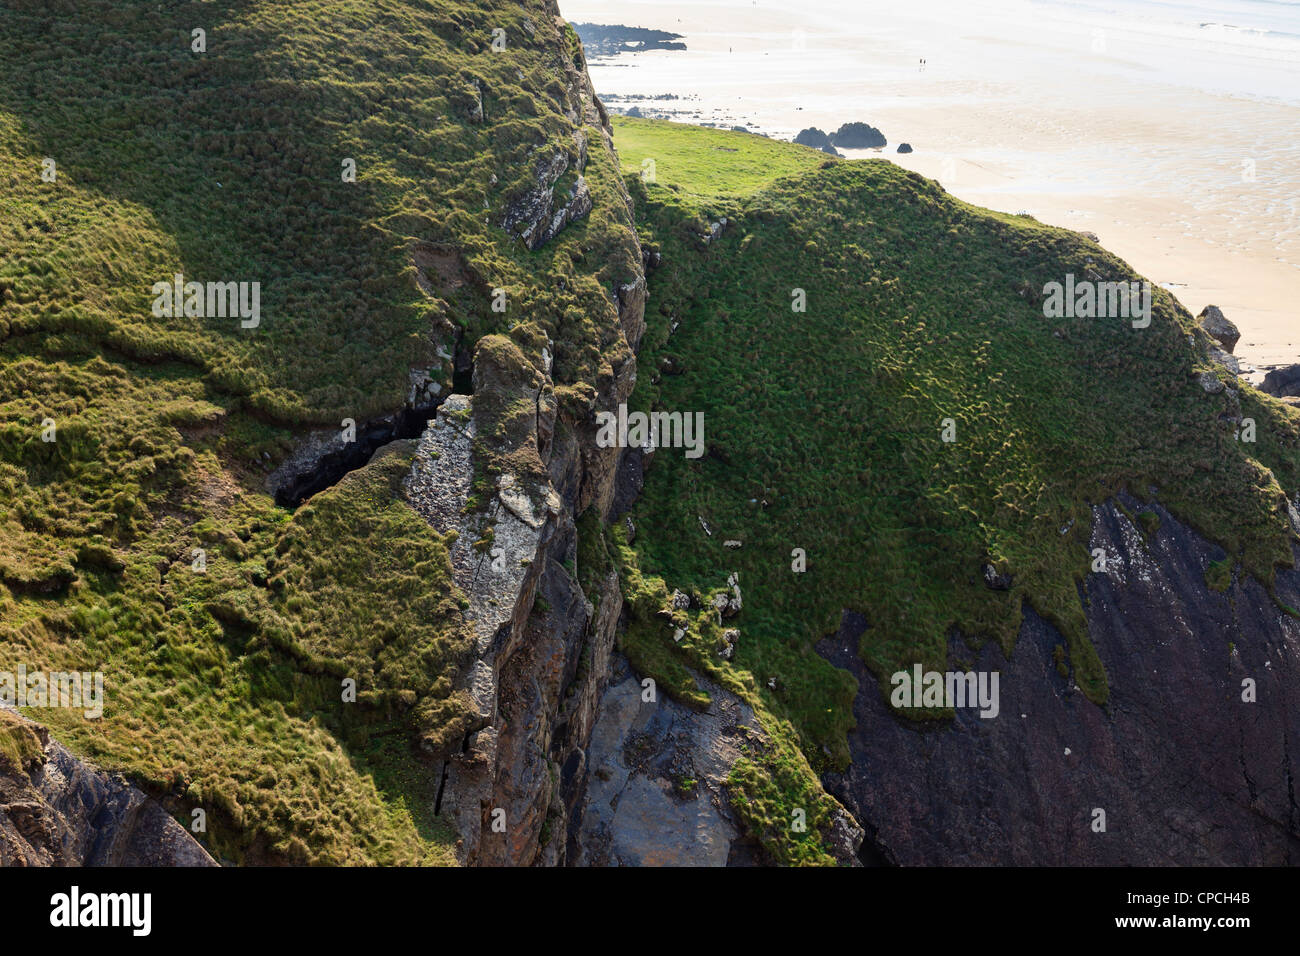 Rocks cracking and breaking away from the eroding cliffs above the beach at Bude, Cornwall, England, UK, Britain Stock Photo